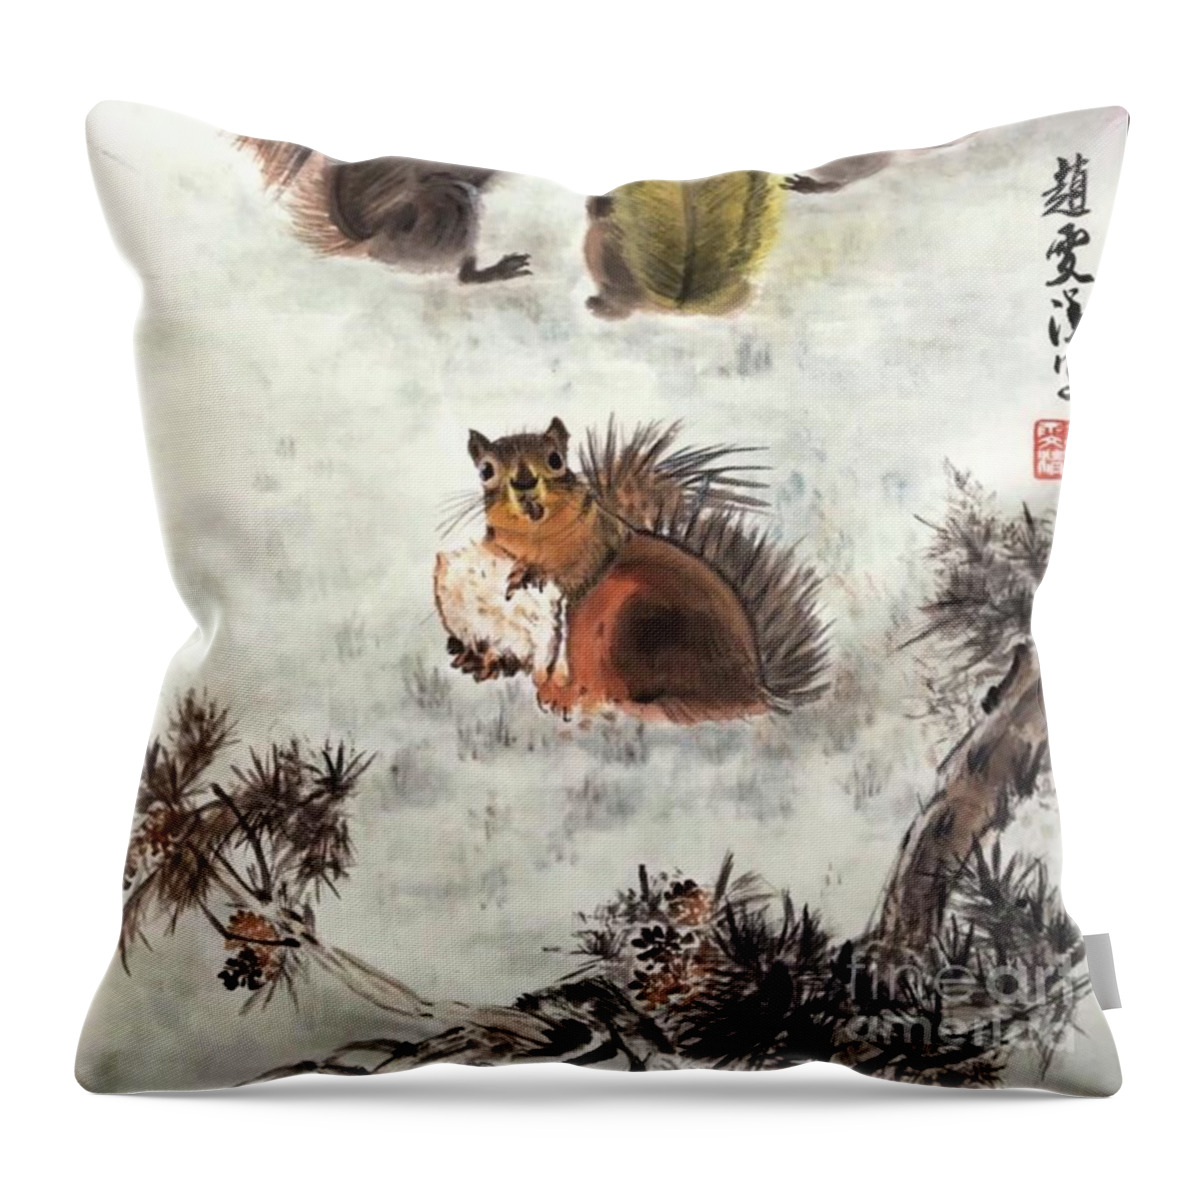 Squirrels Throw Pillow featuring the painting Four Squirrels In The Neighborhood by Carmen Lam